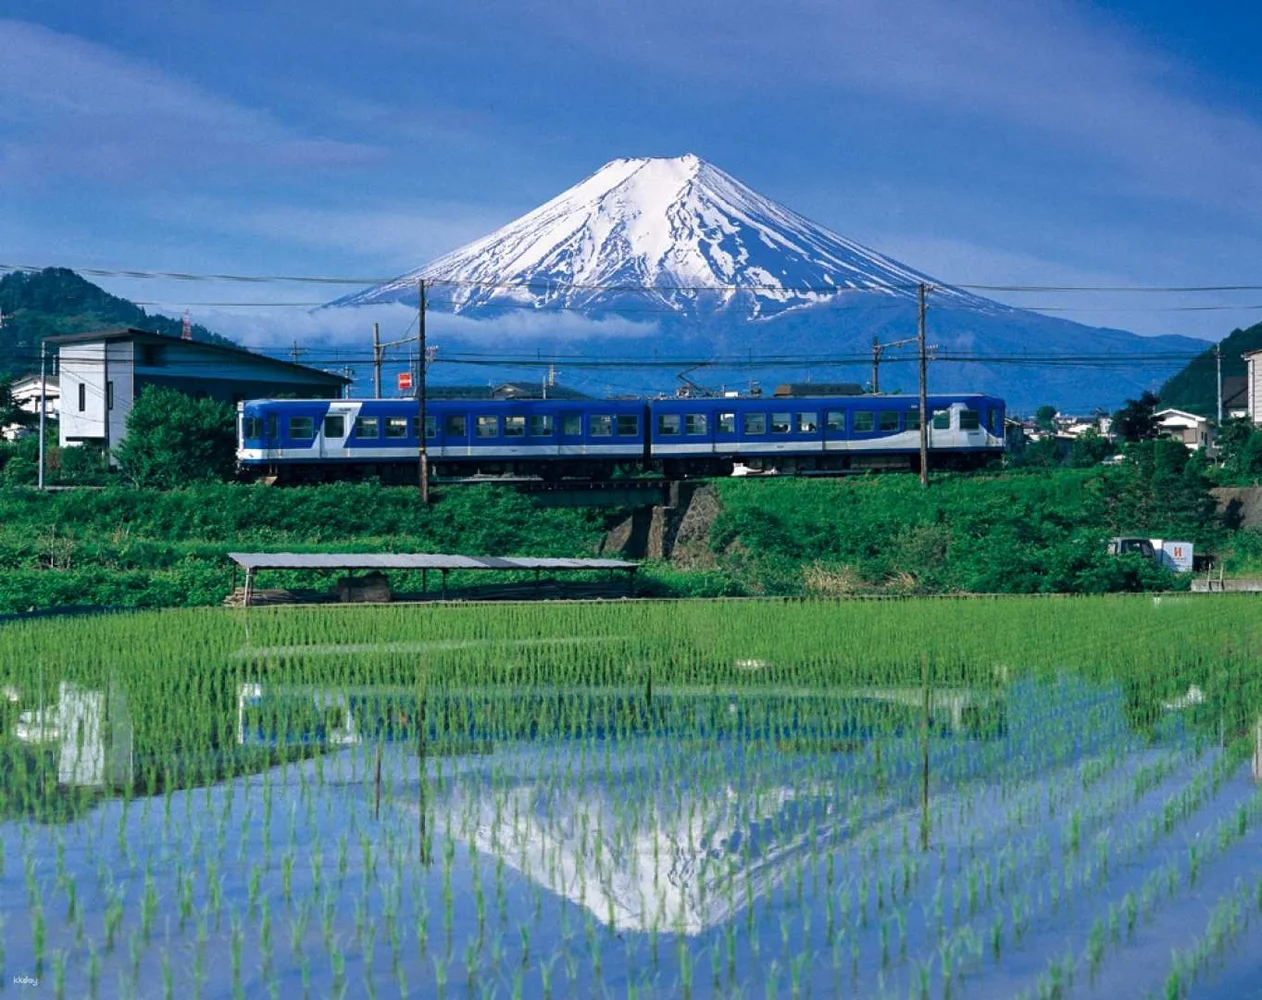 Buy Mt Fuji Pass Online – 1, 2 or 3 Days Unlimited Travel Ticket